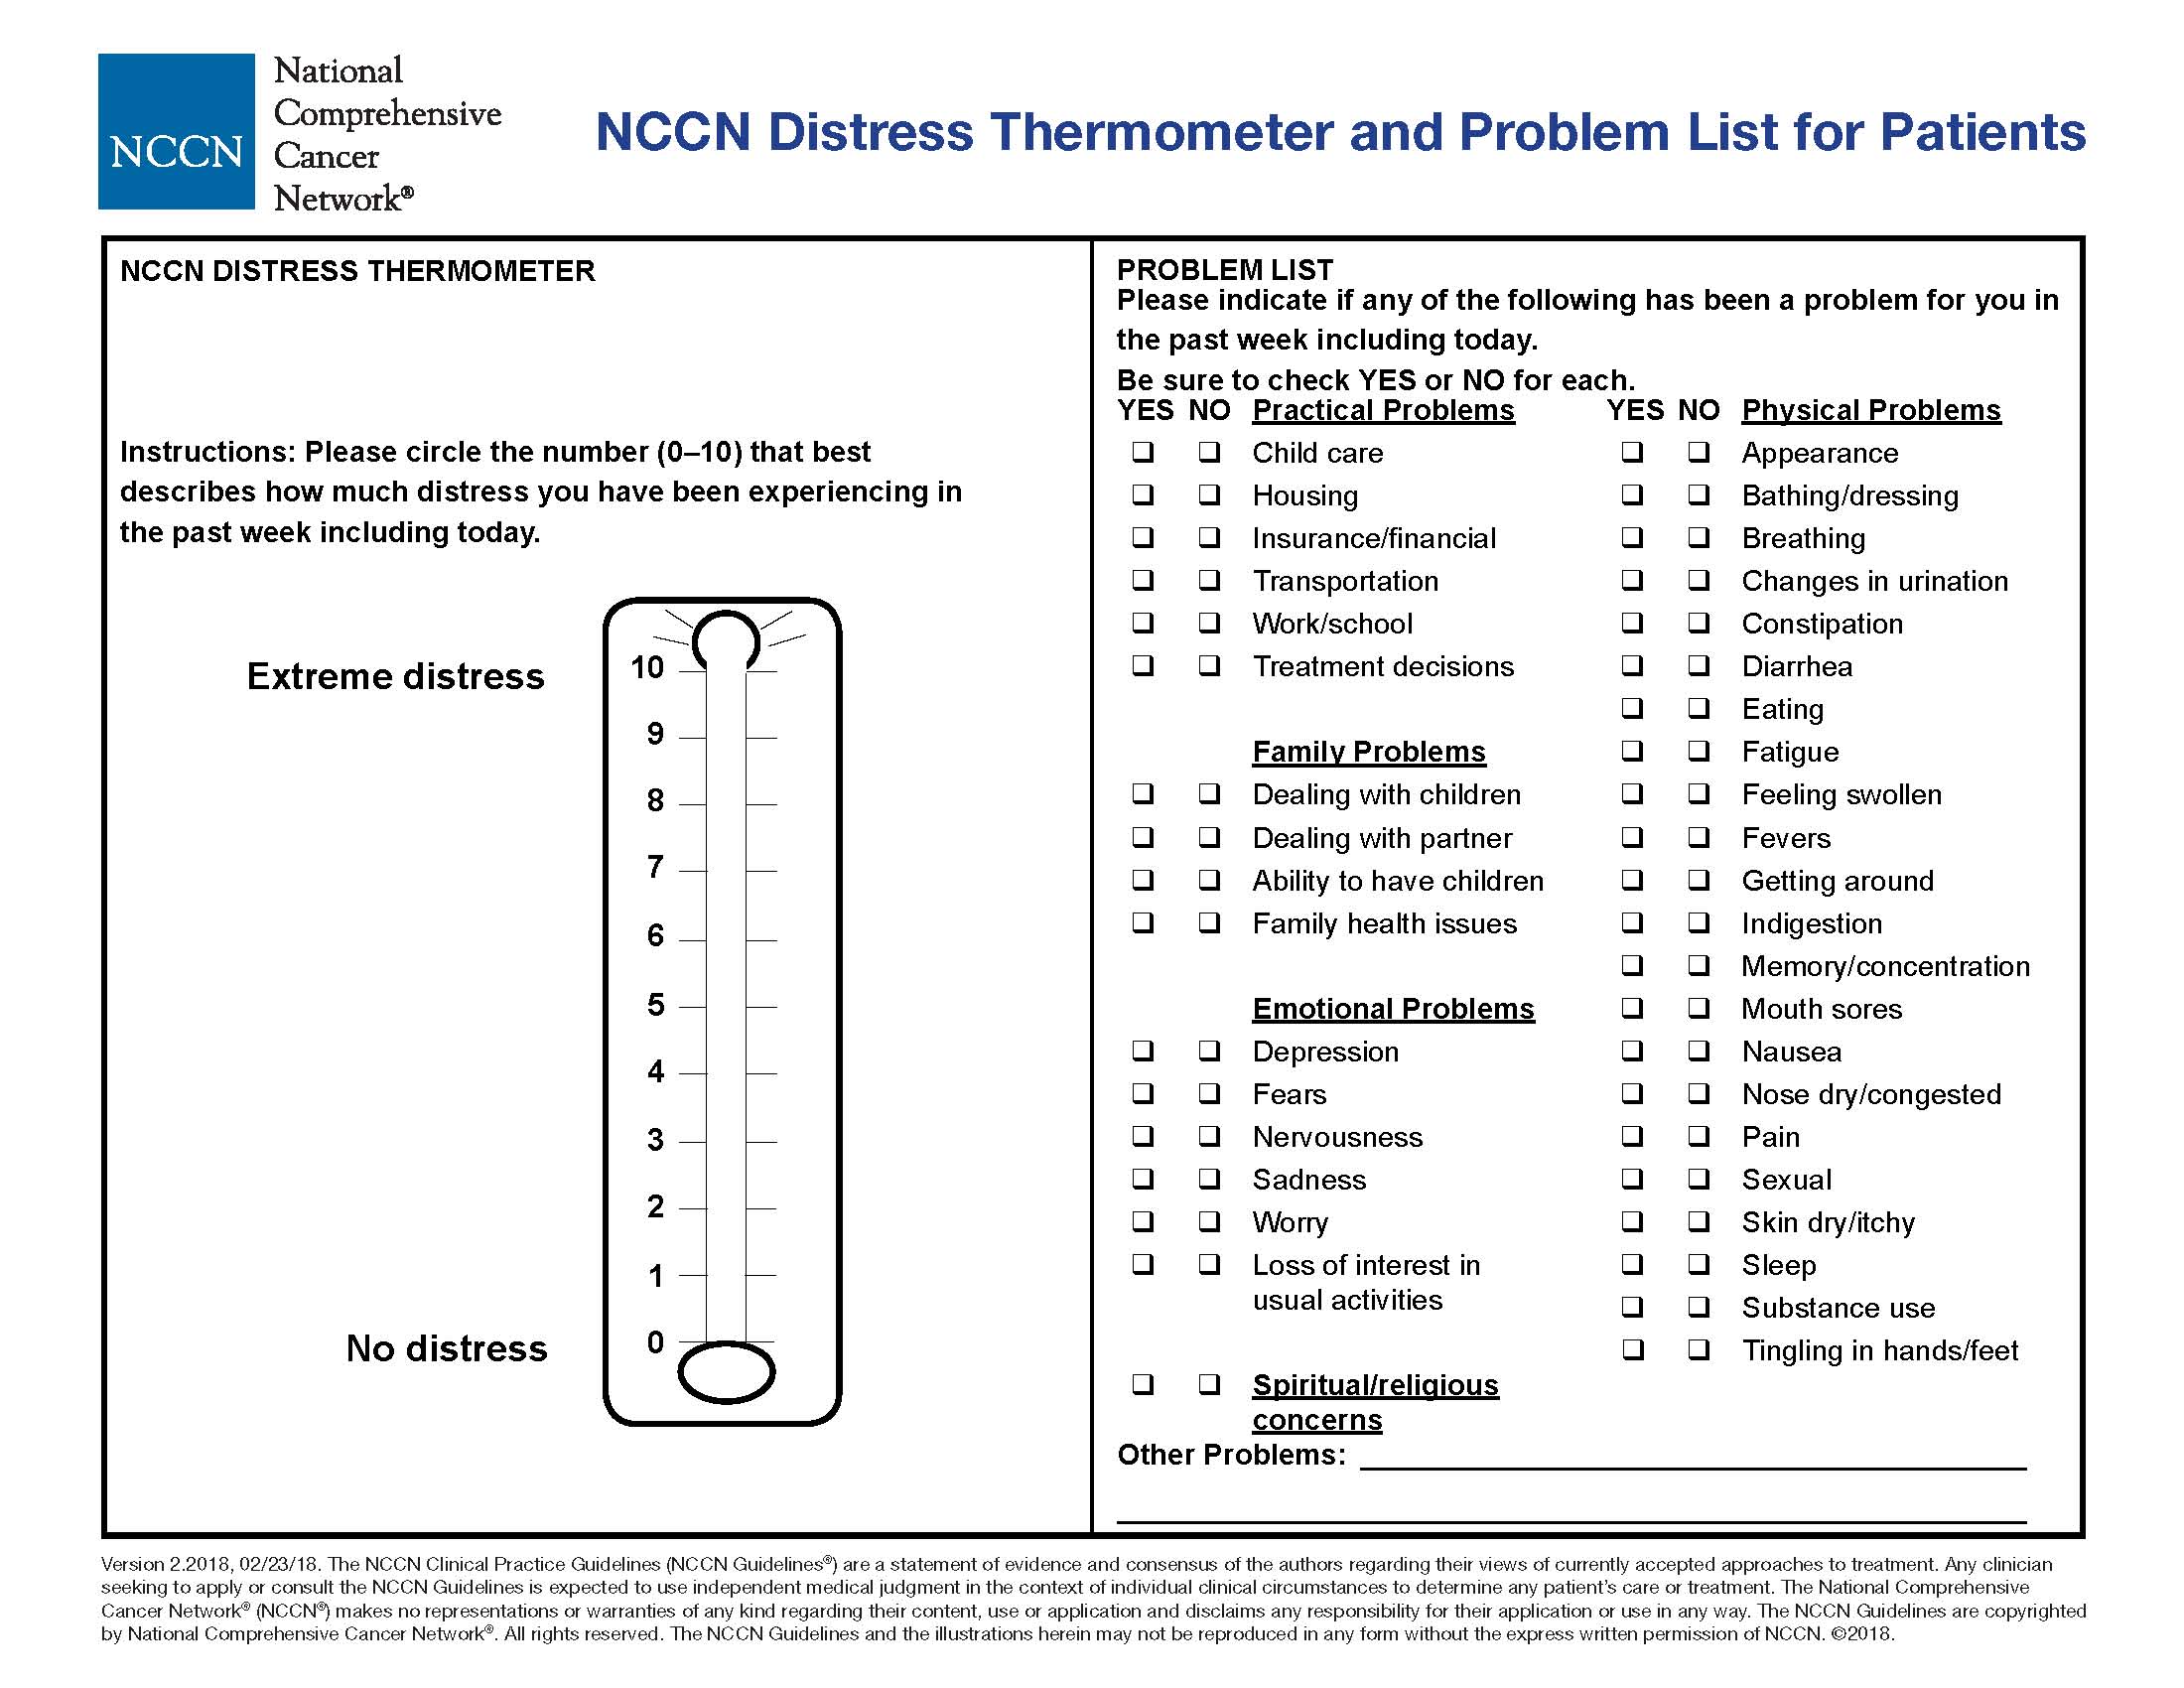 nccn_distress_thermometer-4